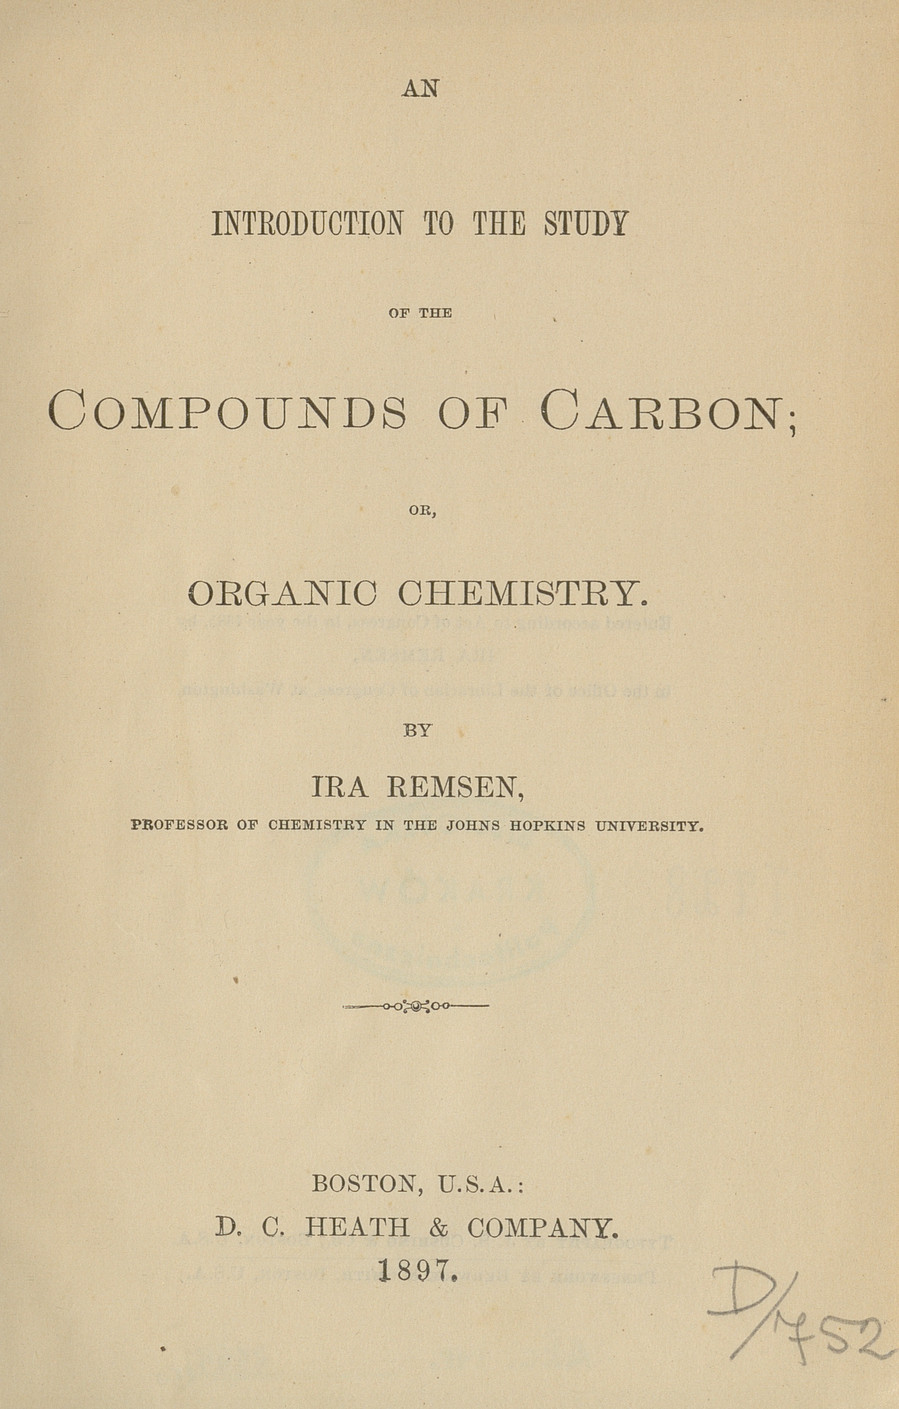 An introduction to the study of the compounds of carbon or, organic chemistry